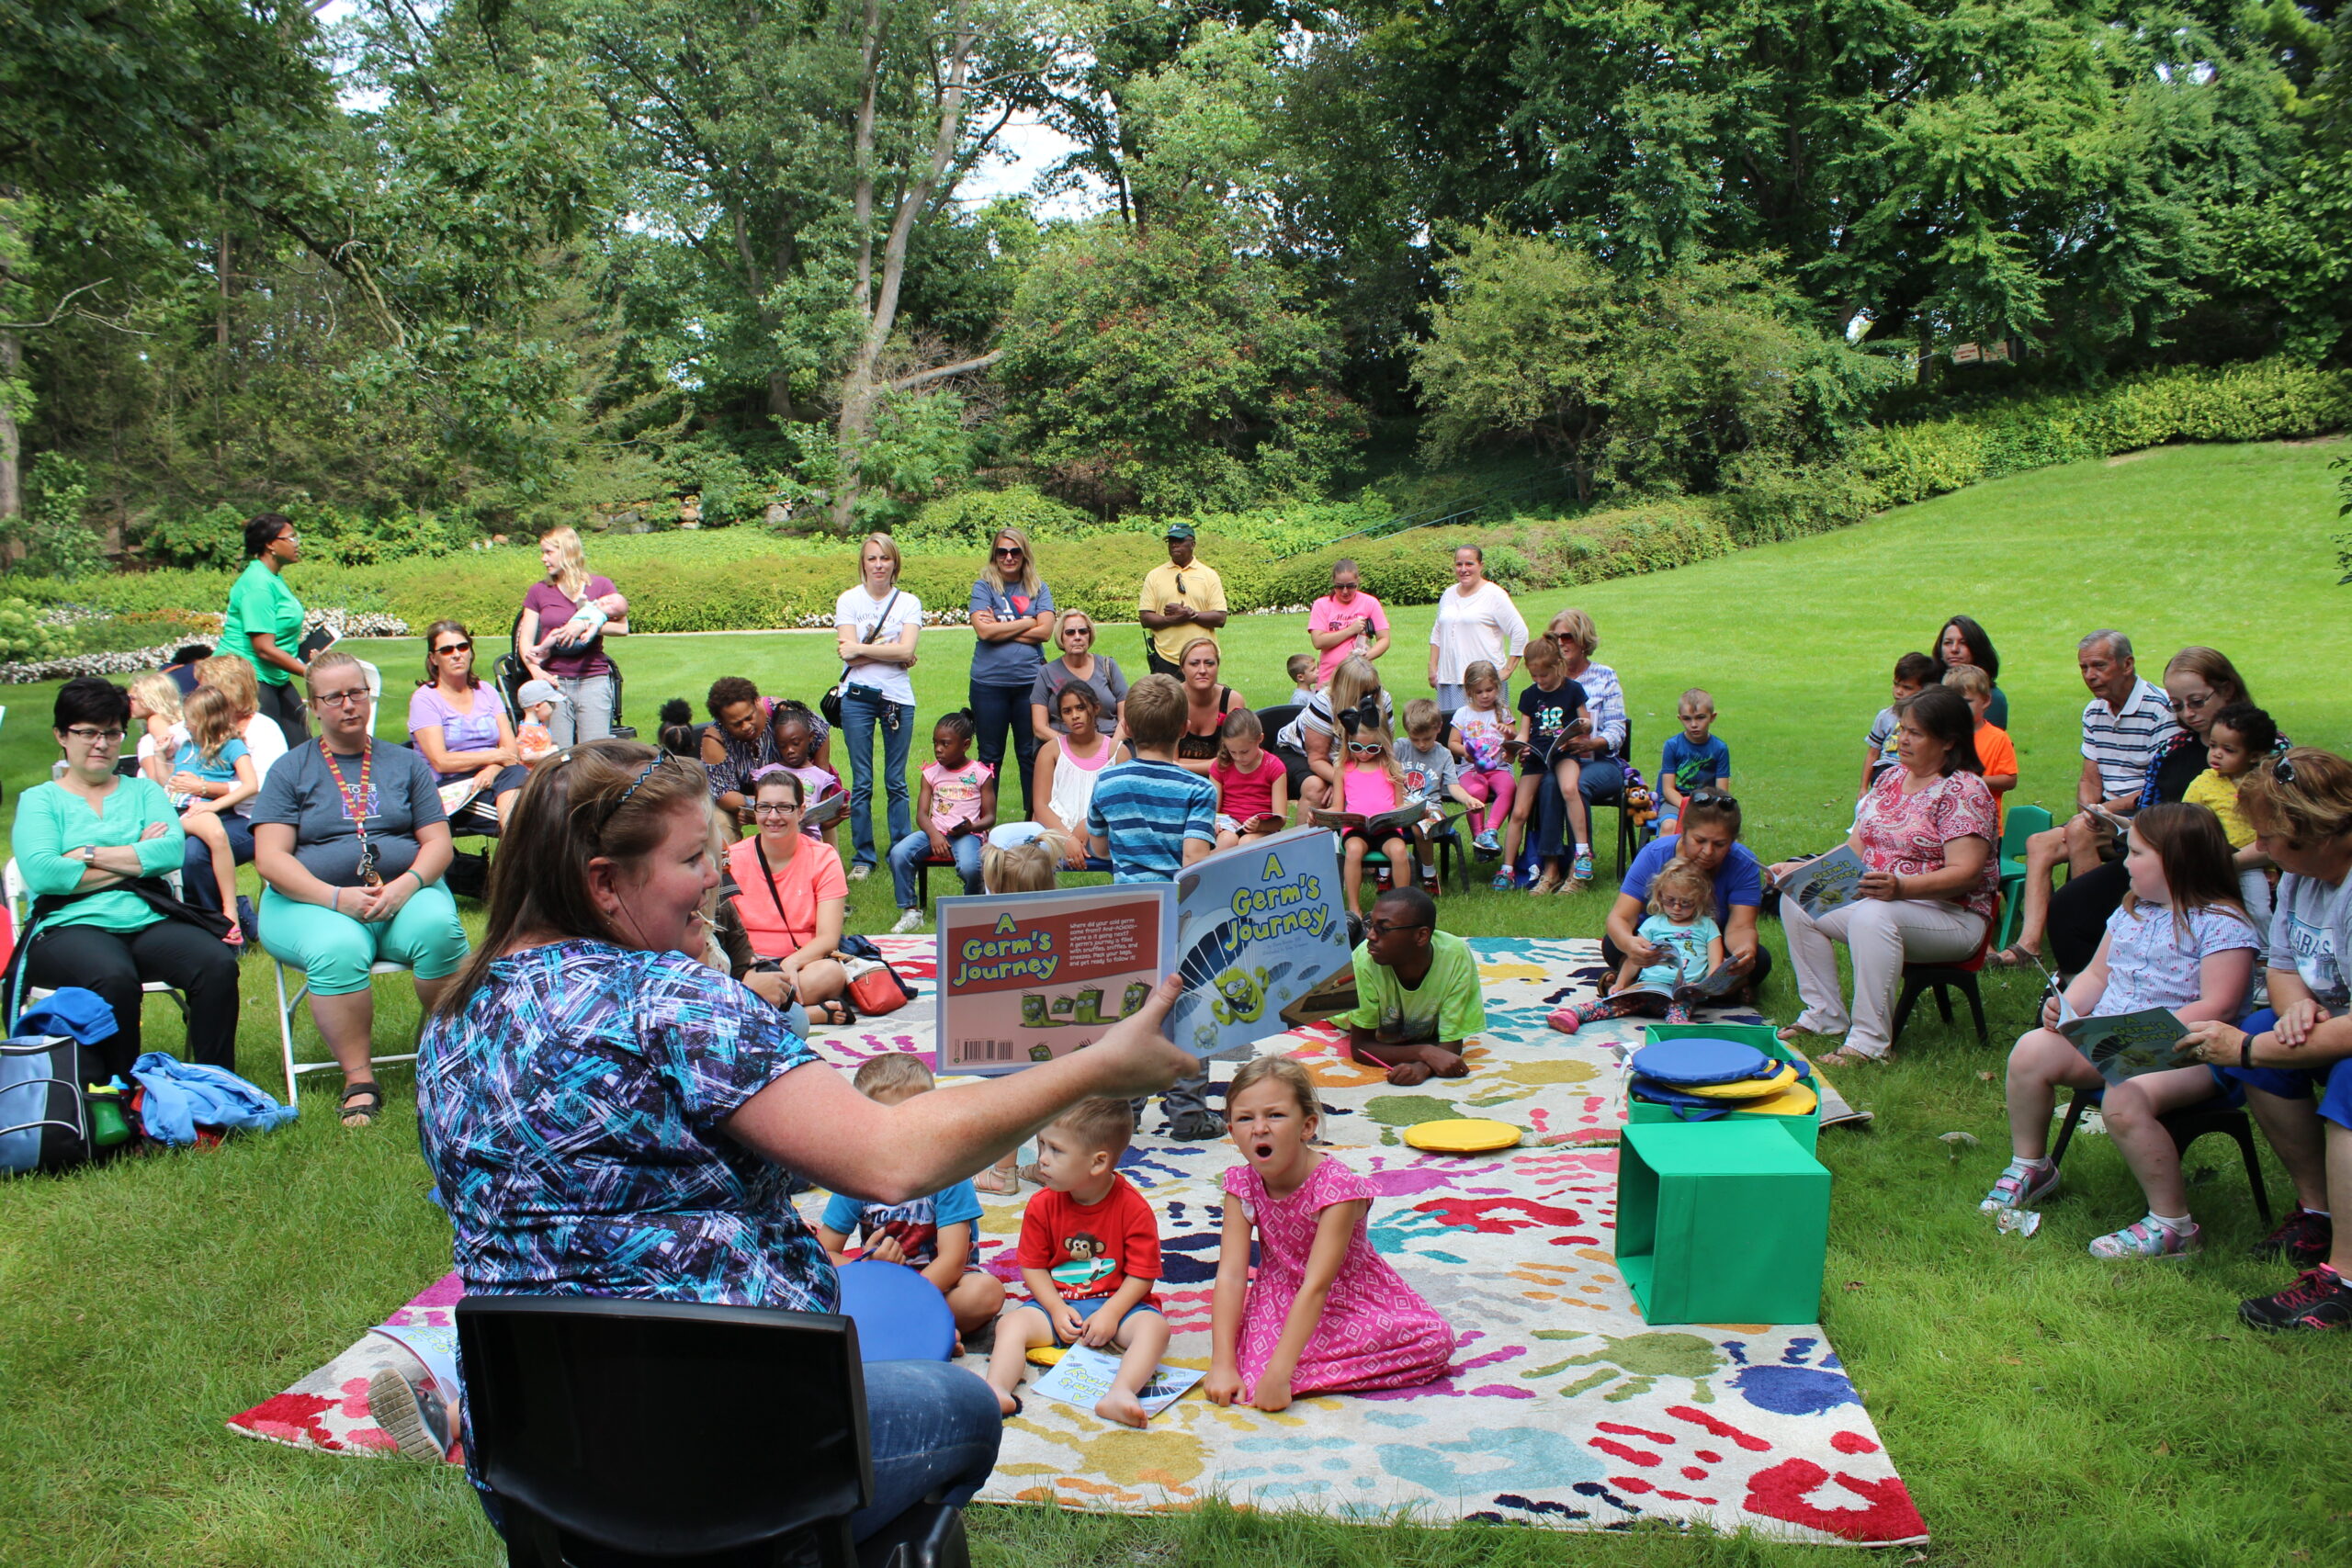 https://www.ruthmottfoundation.org/wp-content/uploads/2021/04/woman-reading-to-kids-outside-at-storytime-at-applewood-scaled.jpg